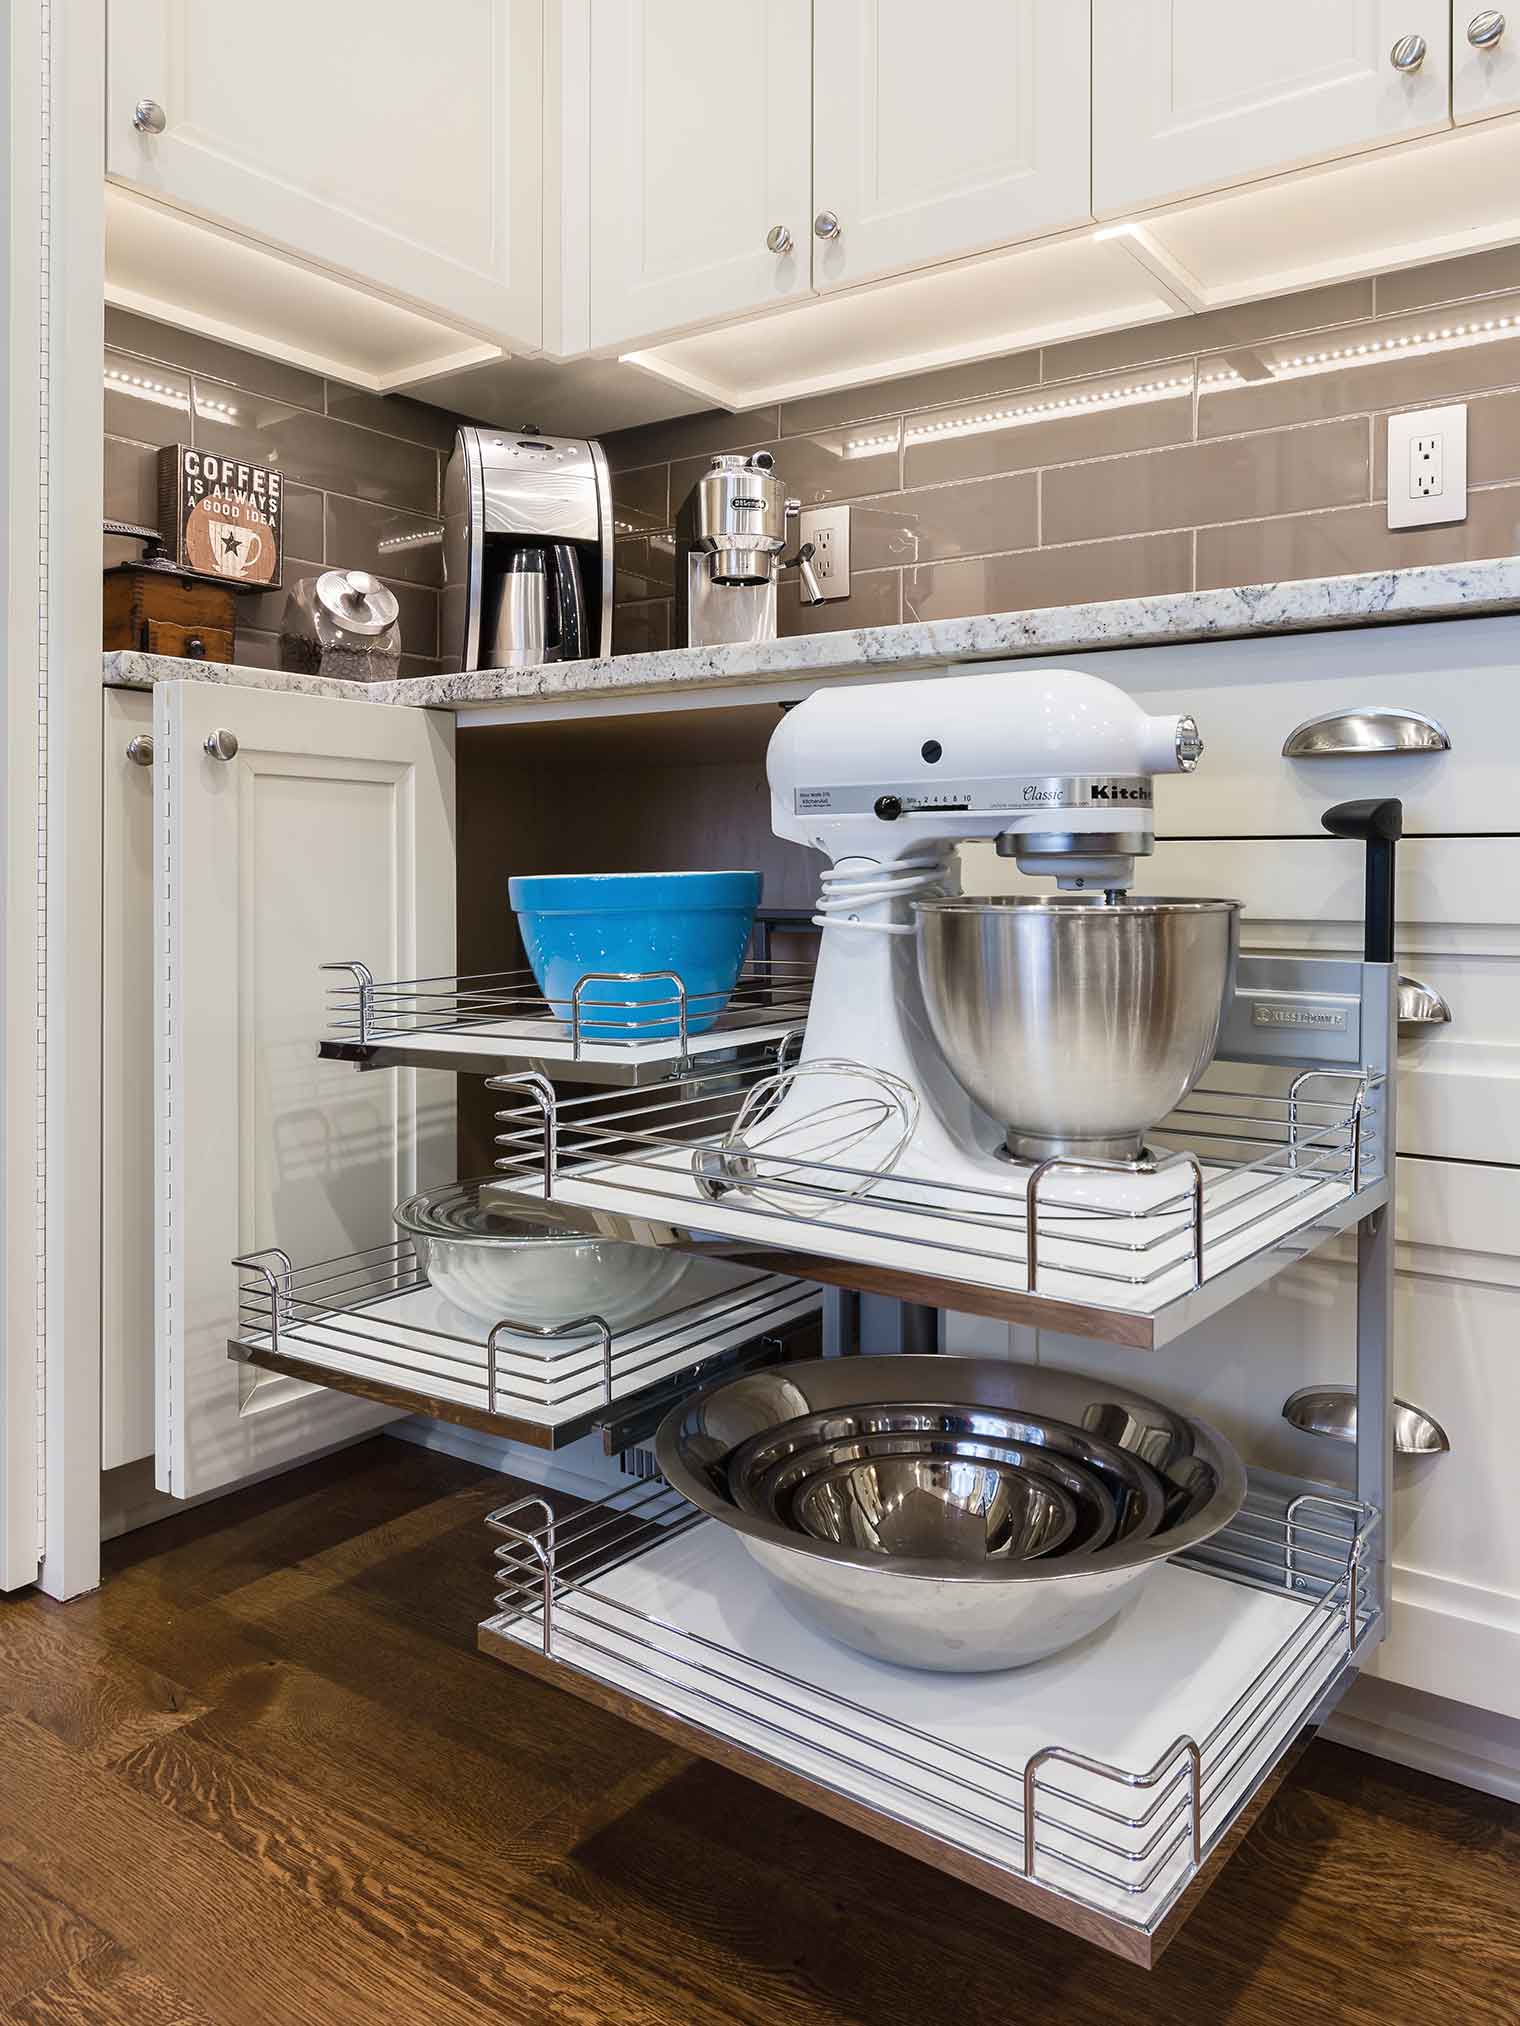 Magic corner cabinet for blind corner cabinet in West Des Moines Clive kitchen remodeler Silent Rivers allows Kitchen Aid mixer to come to you easily out of the corner cabinet